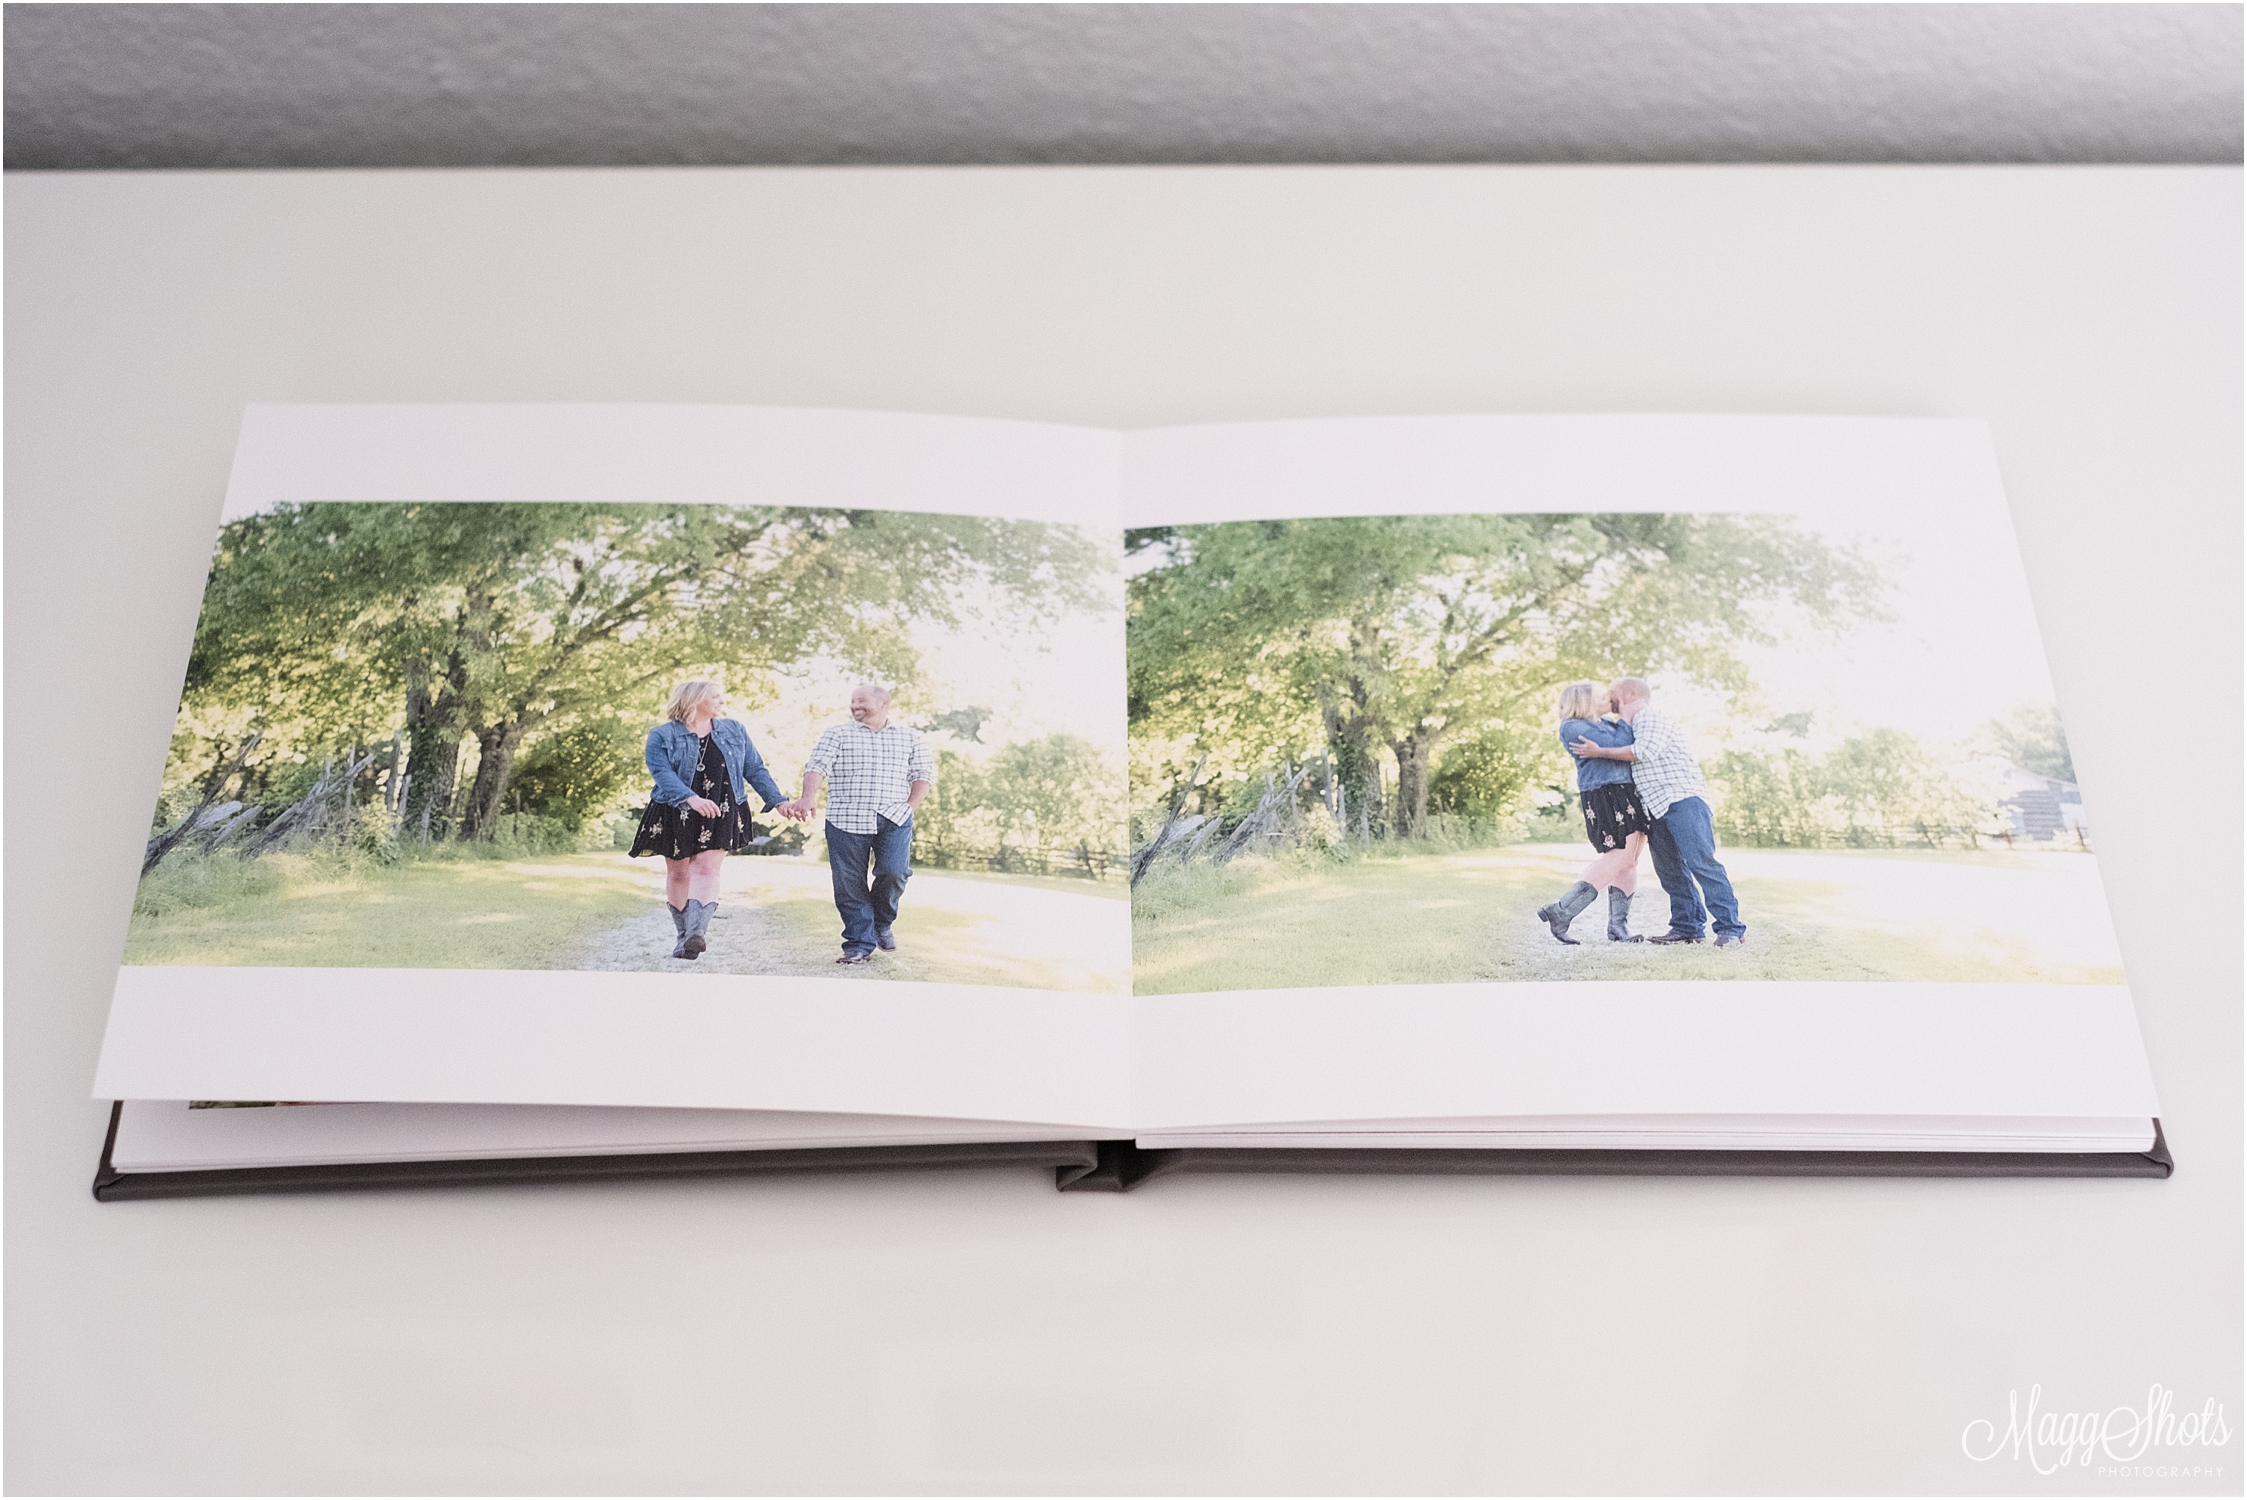 Albums and Guestbooks, Wedding Album, Guestbook, Engagement, Wedding, Blog, Bride and Groom Tips, Love, Portraits, Wedding Photography, Wedding Photographer, Professional Photography, Professional Photographer, 